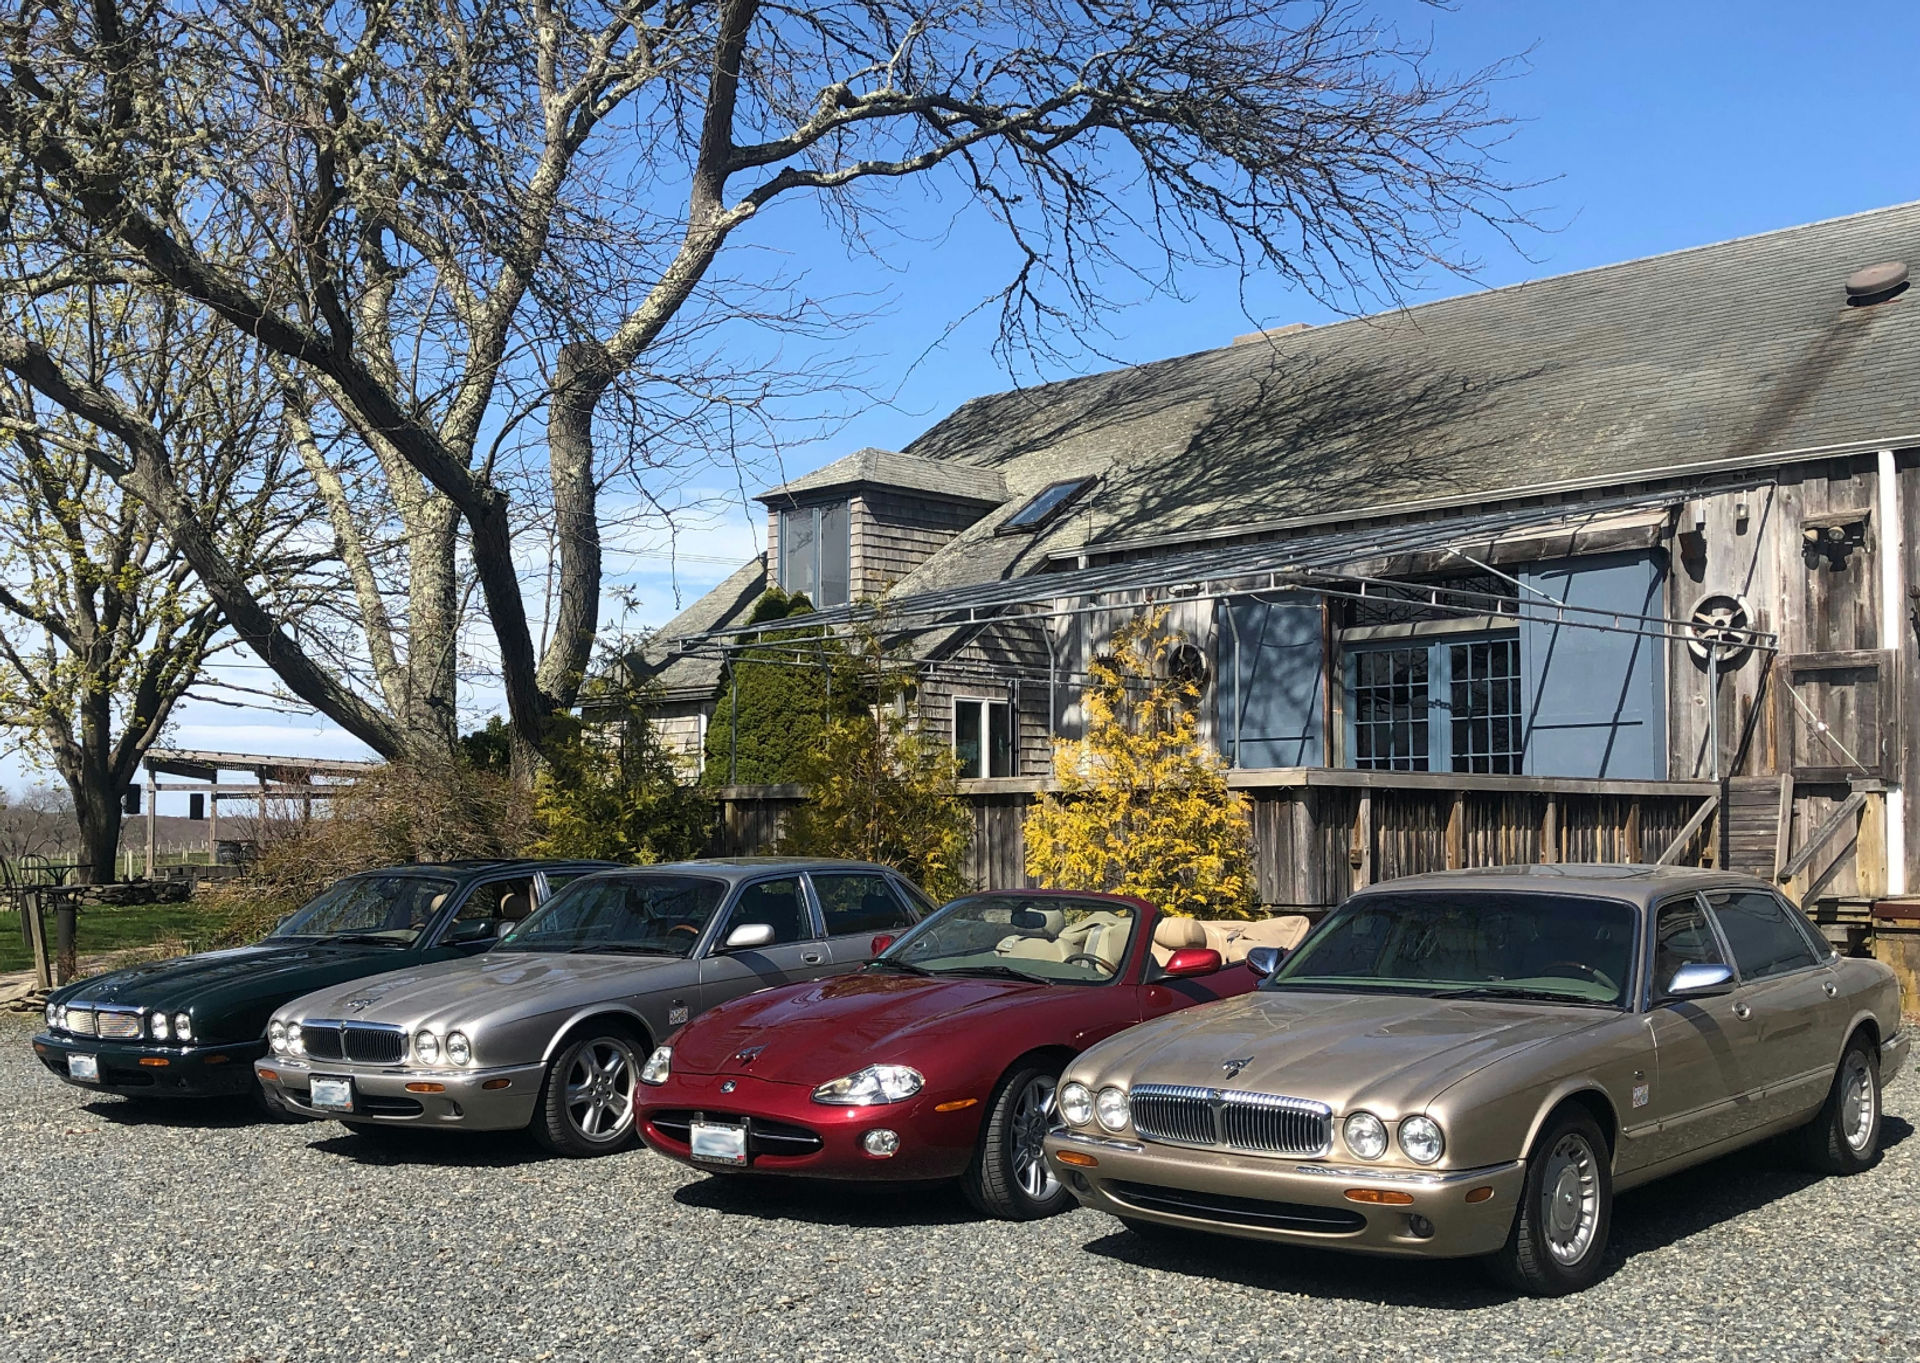 Wine Tasting Tour in Chauffeured Classic Jaguar Motorcars with an Optional Gourmet Picnic (BYOB) image 1